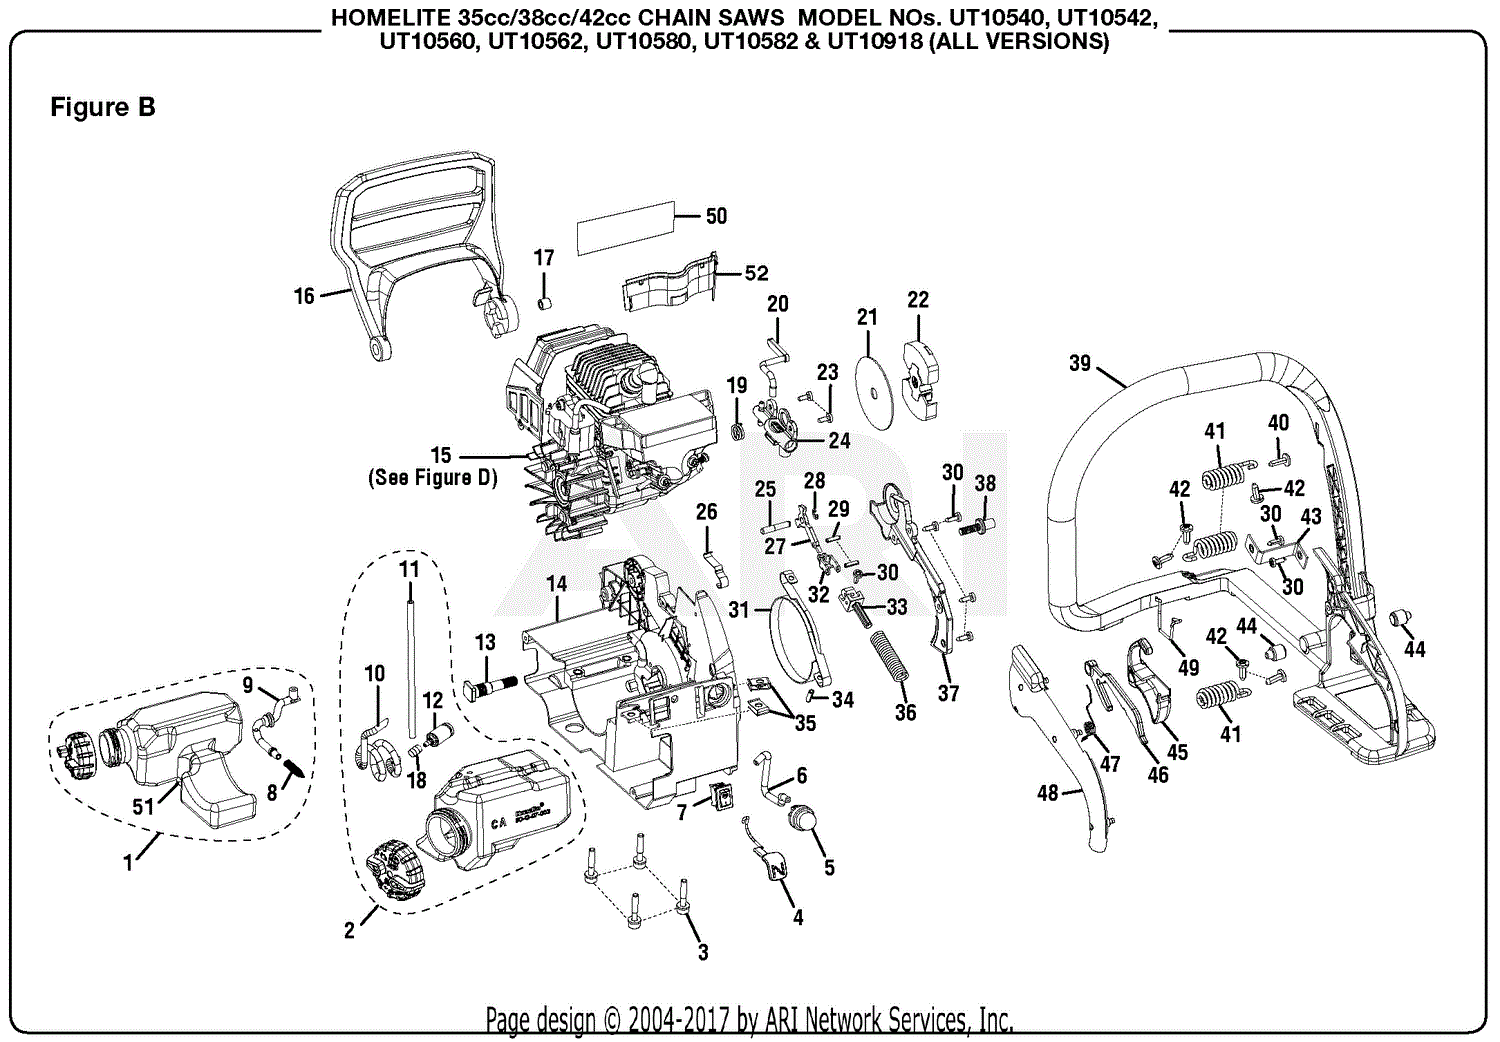 Homelite UT10918 18 in. 42cc Chain Saw Parts Diagram for Figure B